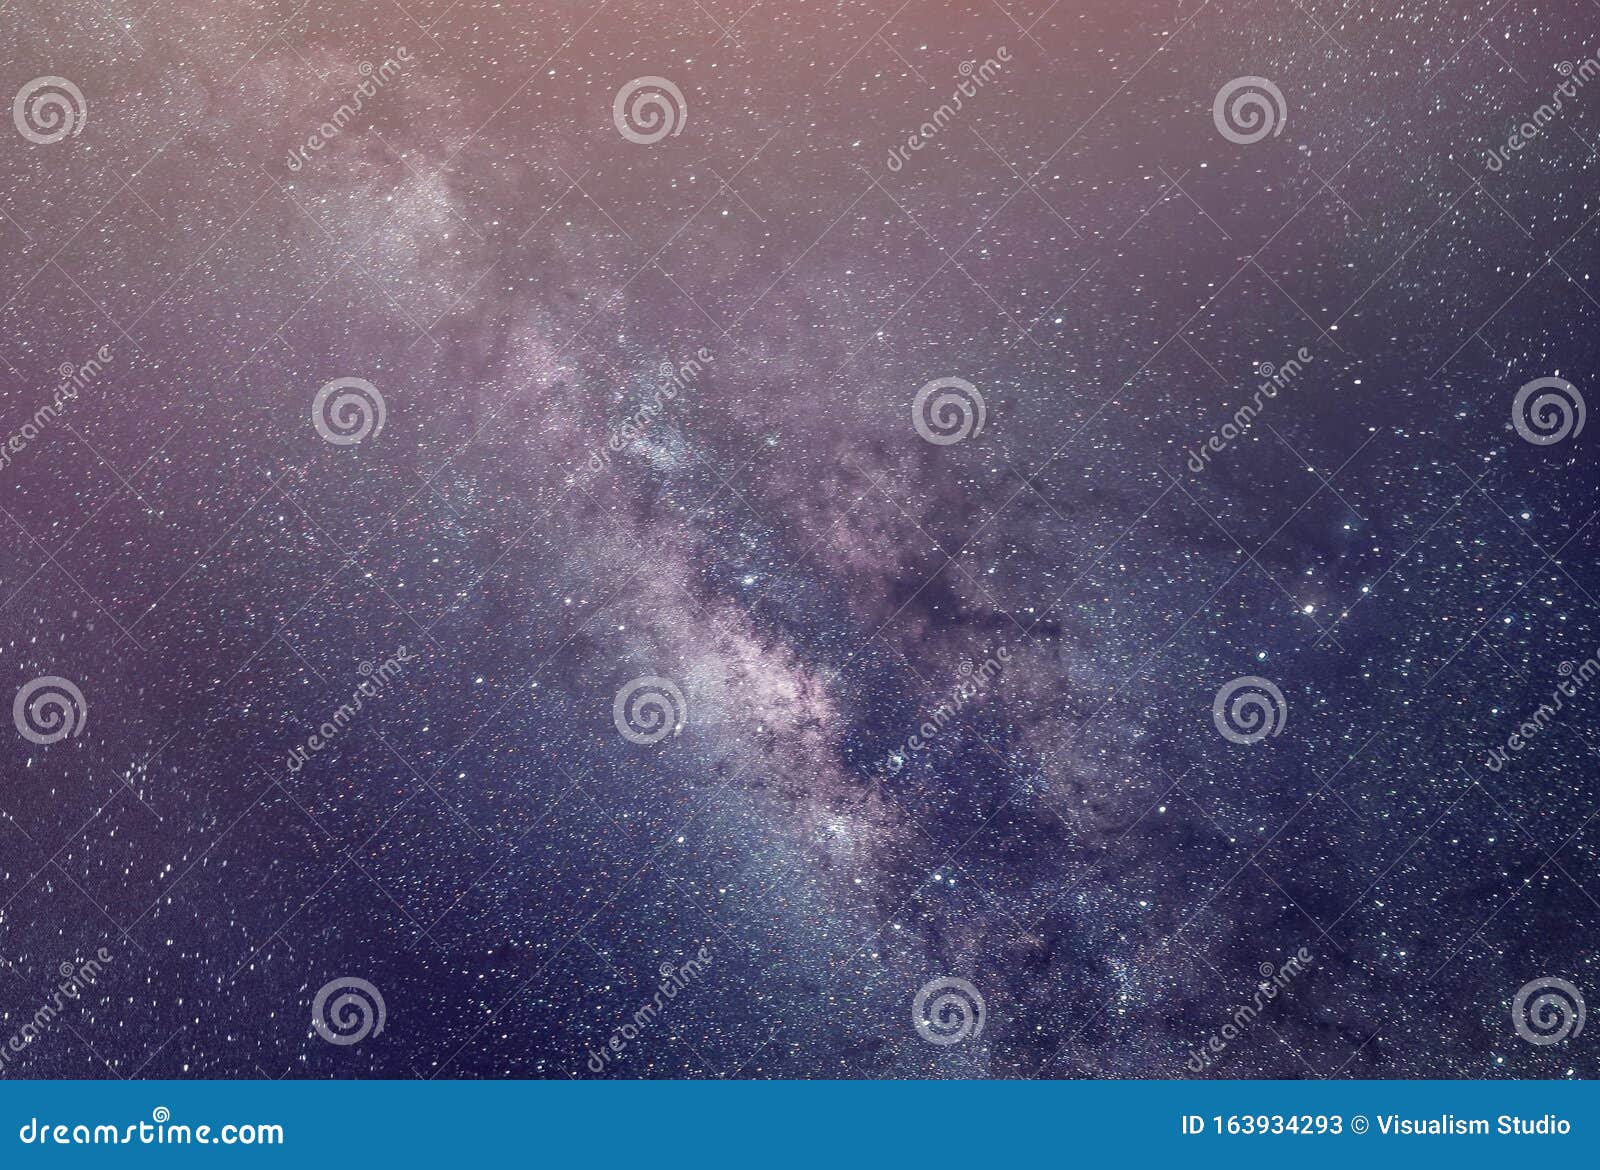 The Background Of Abstract Galaxies With Stars And Planets With Dark Colored Galaxy Motifs Of The Night Light Universe Stock Image Image Of Nebula Darkcolored 163934293